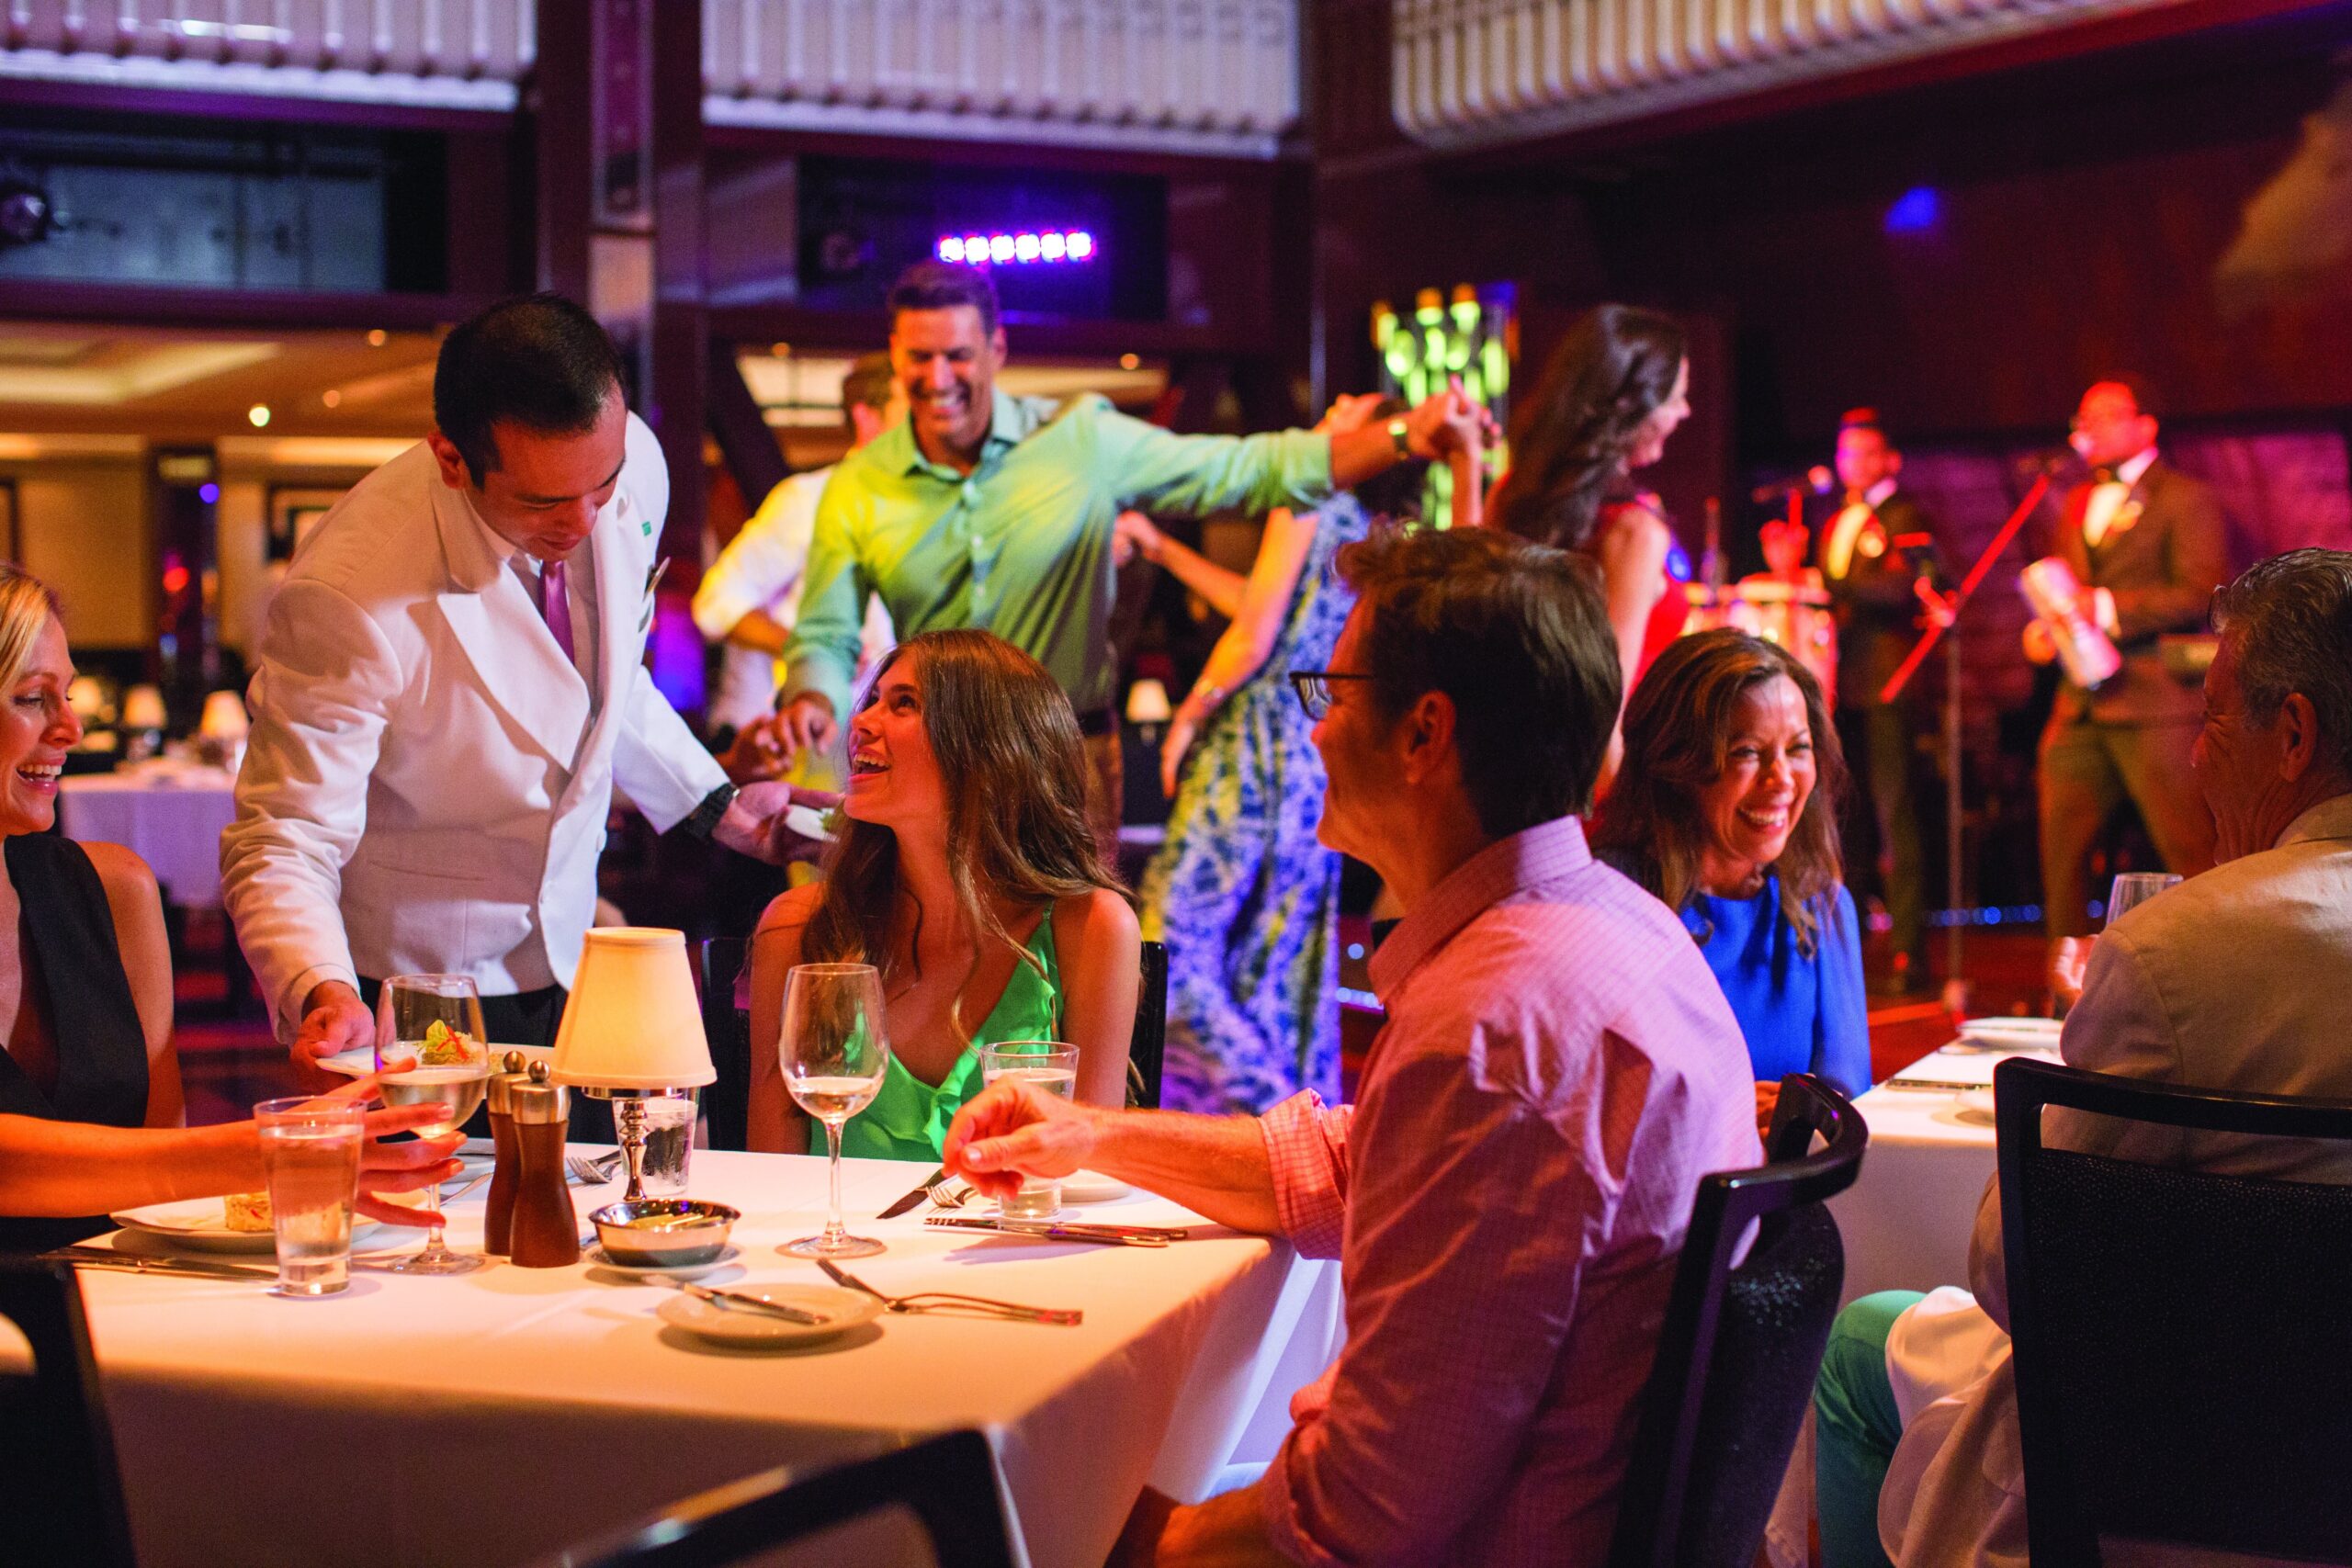 Norwegian Getaway ship people drinking and dining in The Tropicana Room